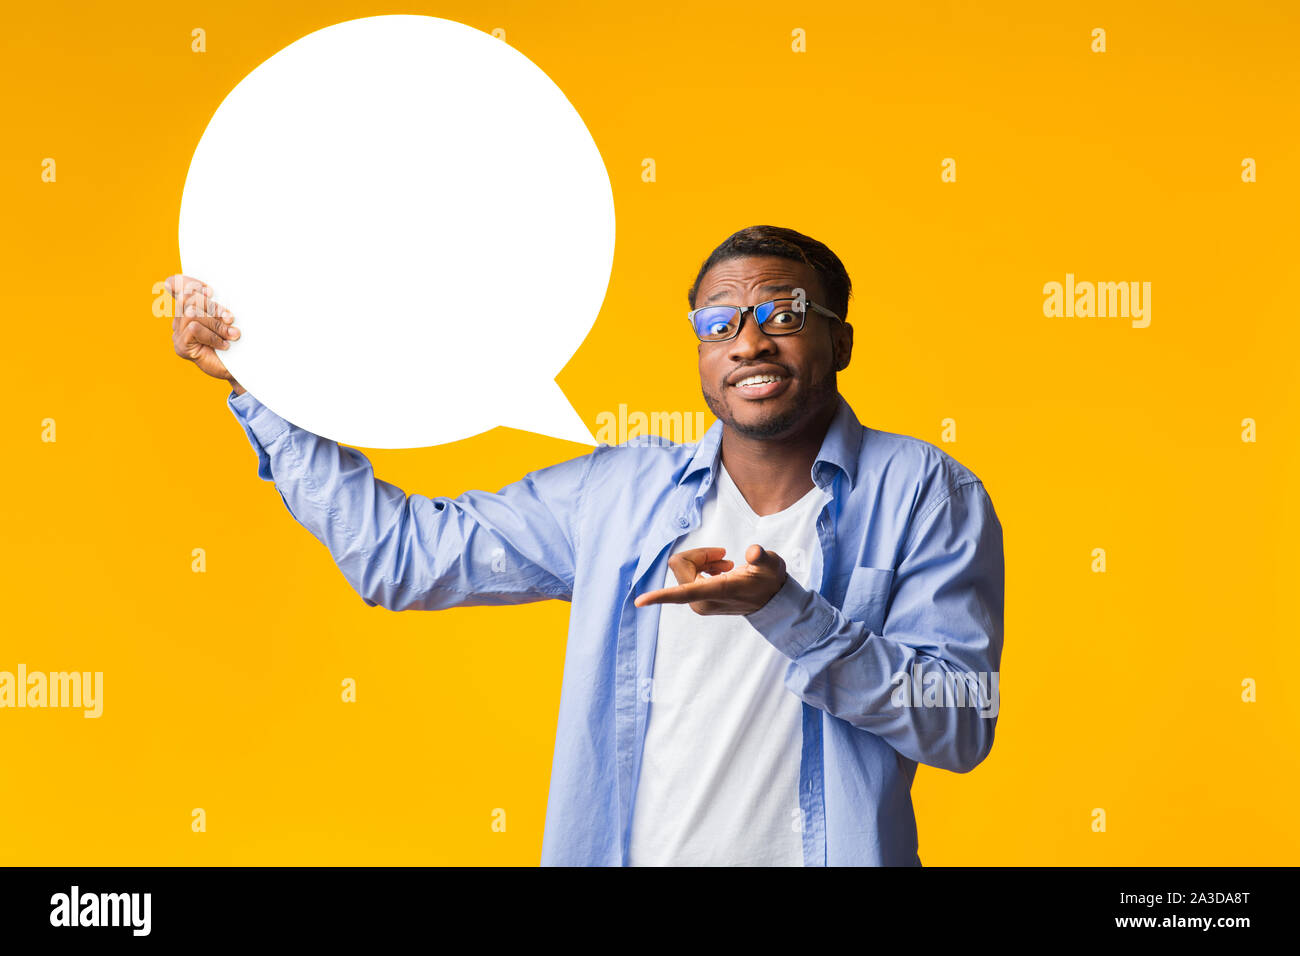 African American Man Holding Speech Bubble Standing Over Yellow Background Stock Photo